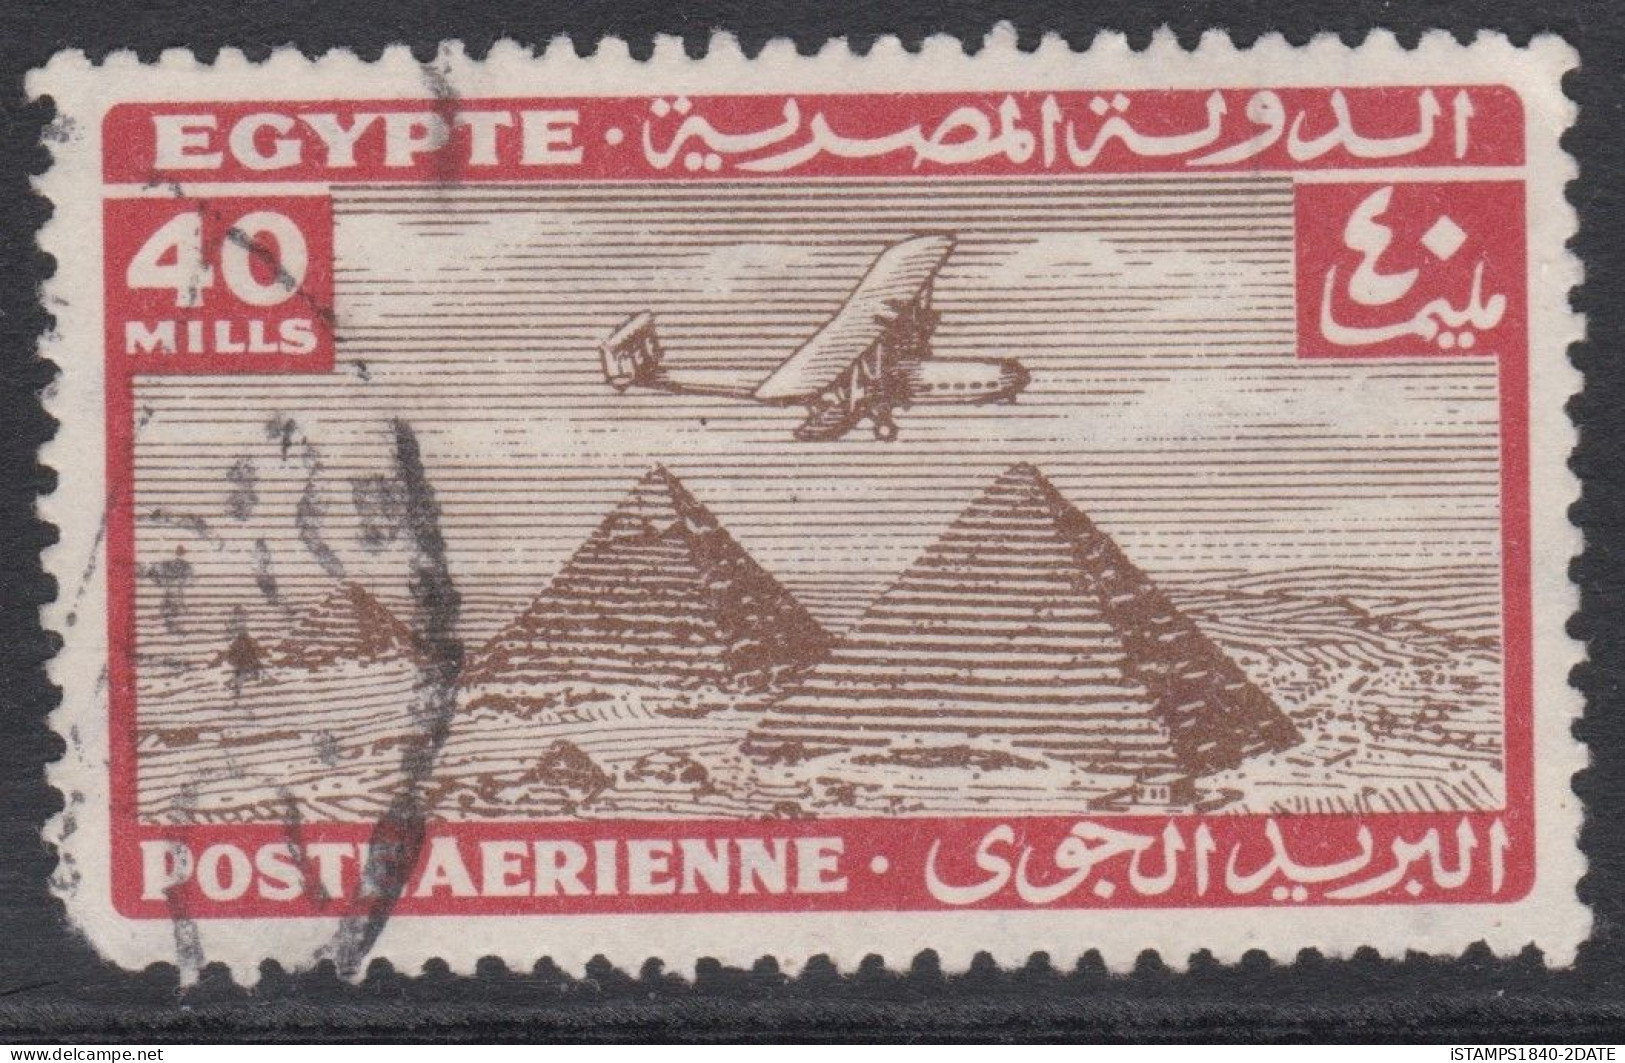 00680/ Egypt 1934/38 Air Mail 40m Used Plane Over Pyramid - Airmail